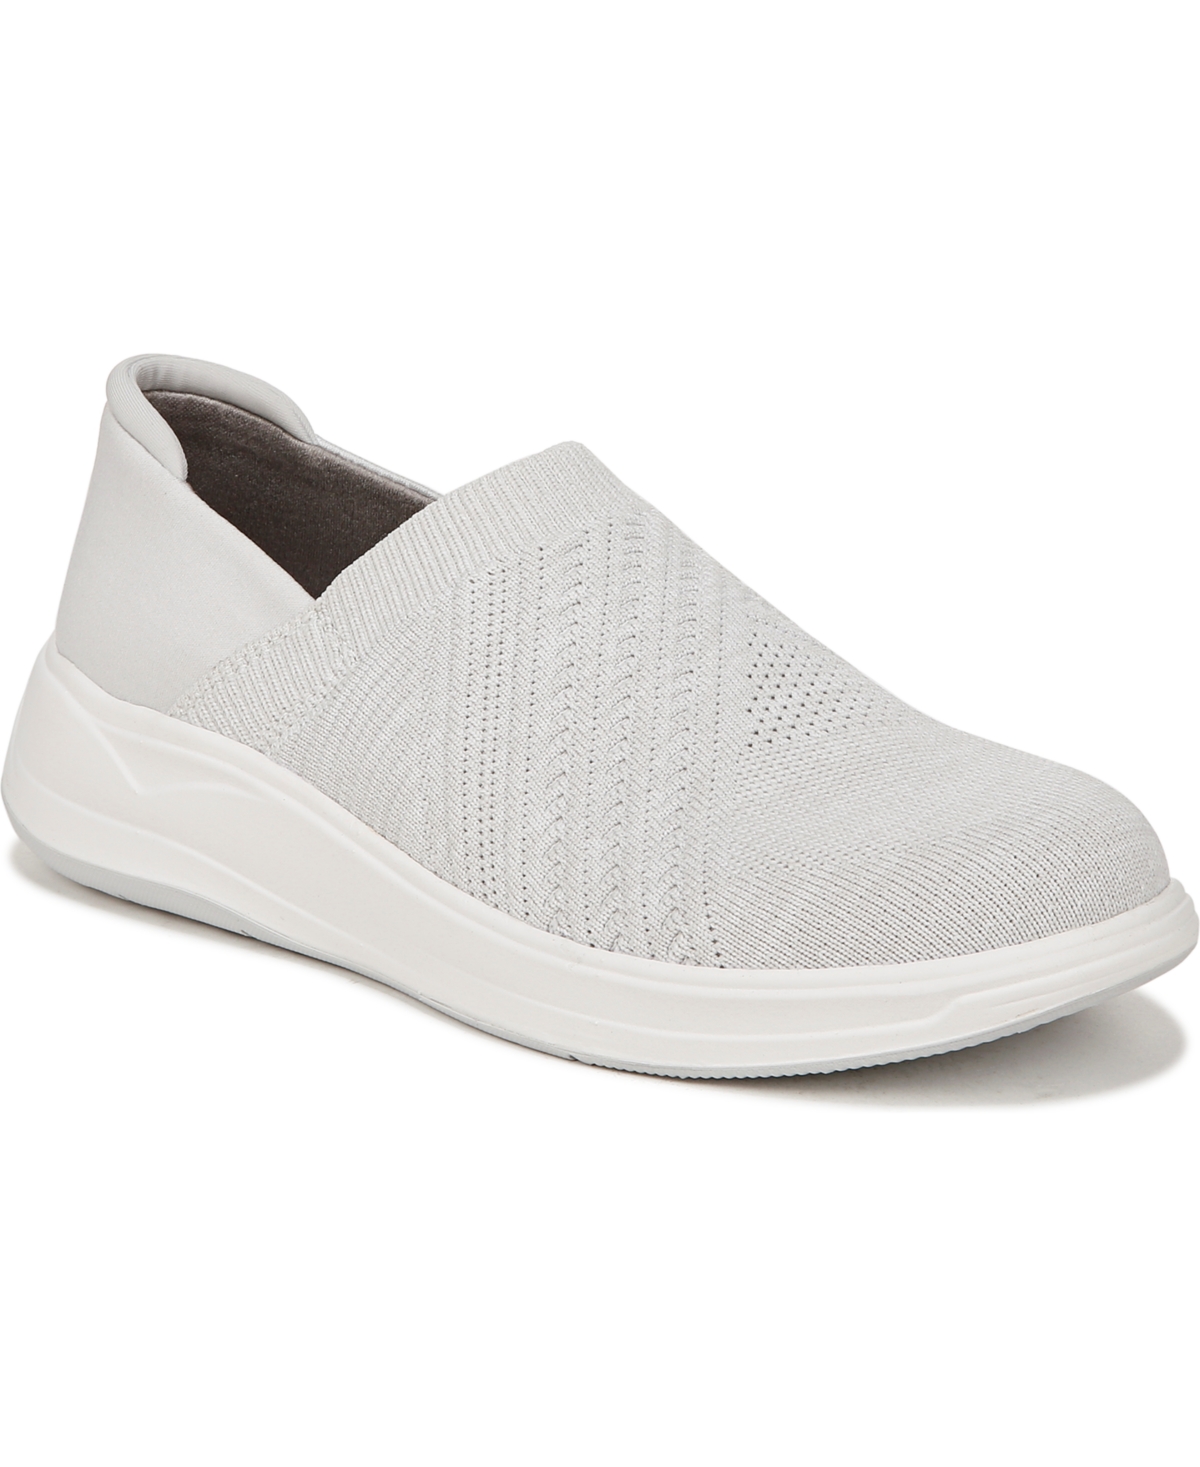 Triumph Washable Slip-Ons - Morel Brown Knit Fabric